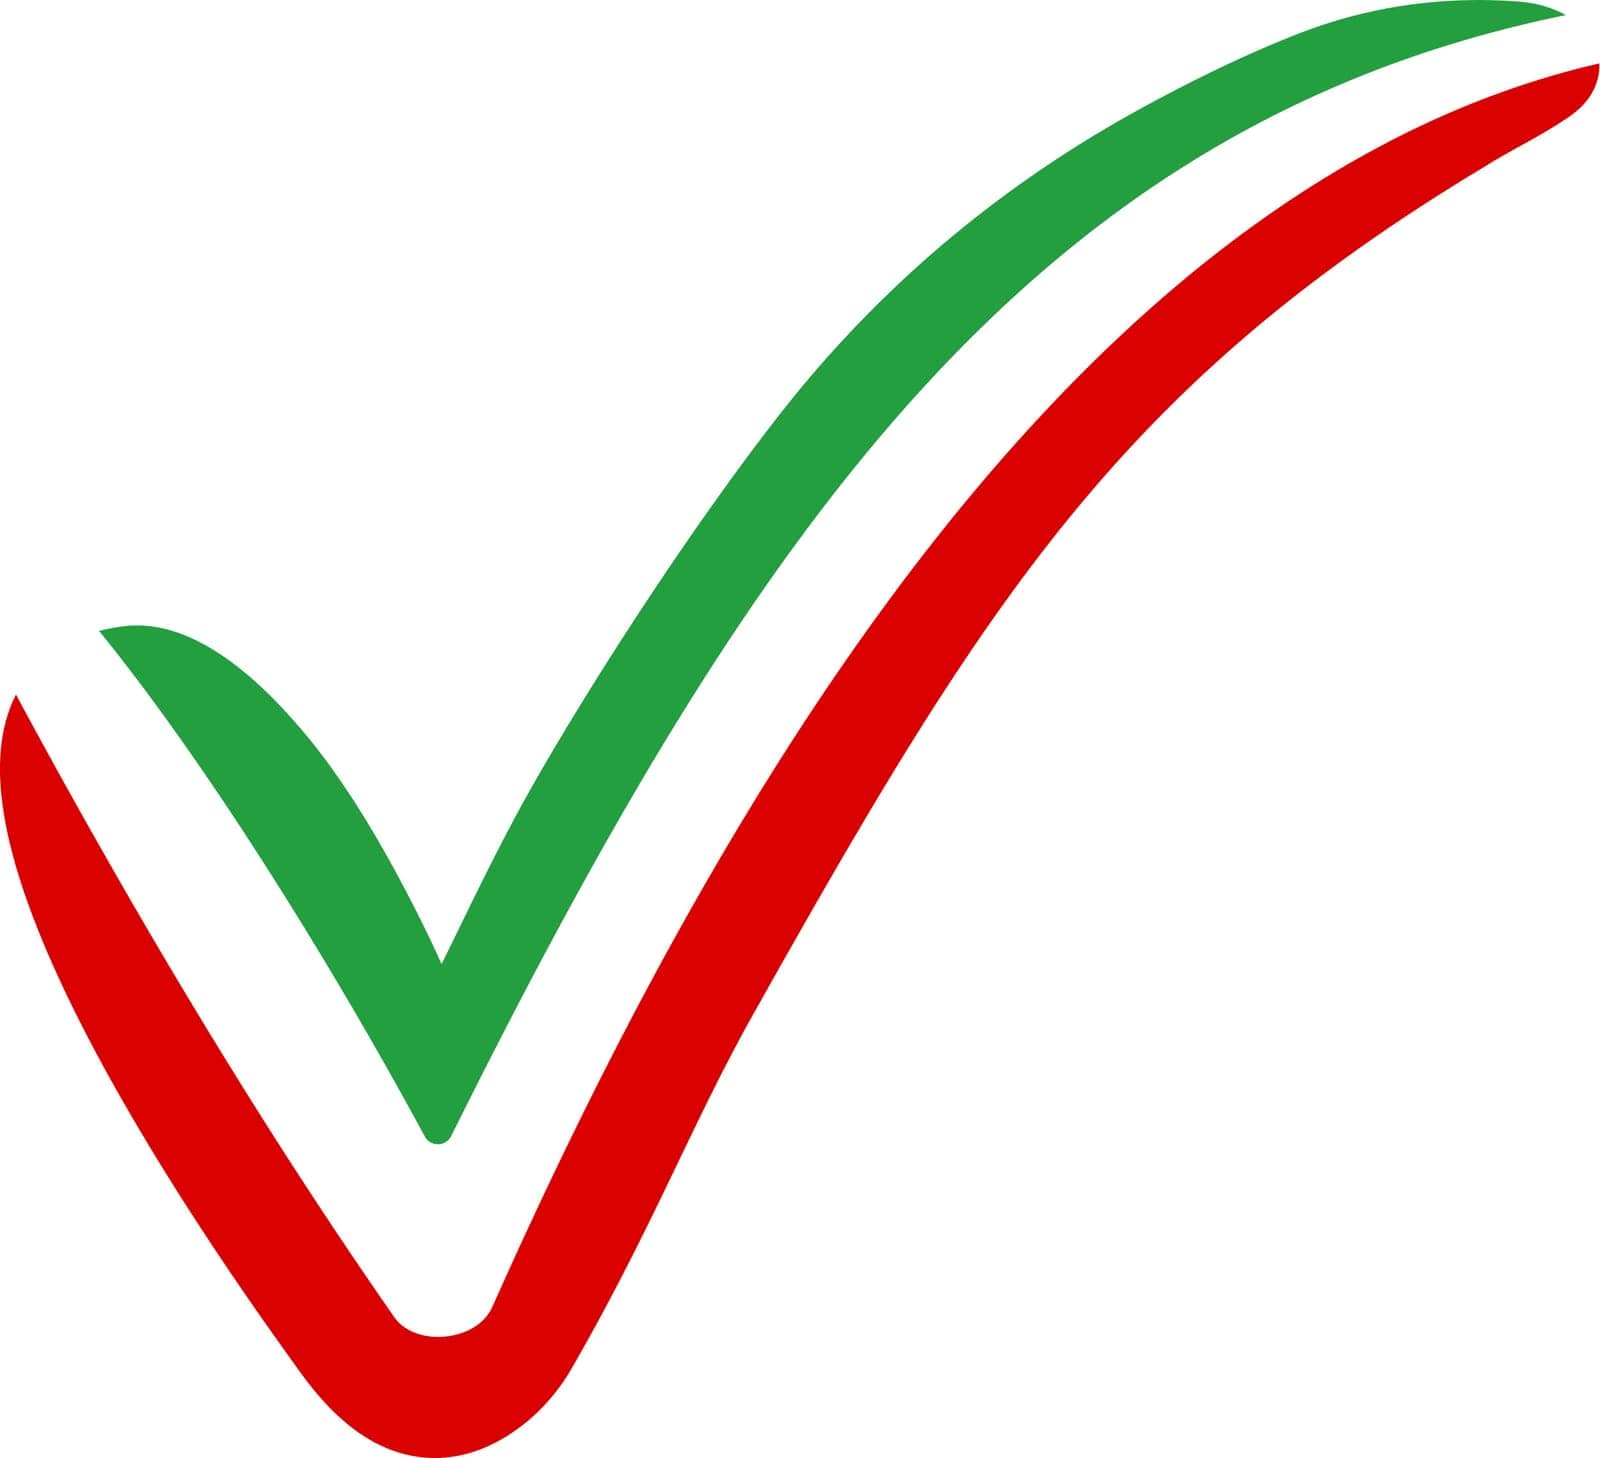 Сheck mark style Iran flag symbol elections, voting approval